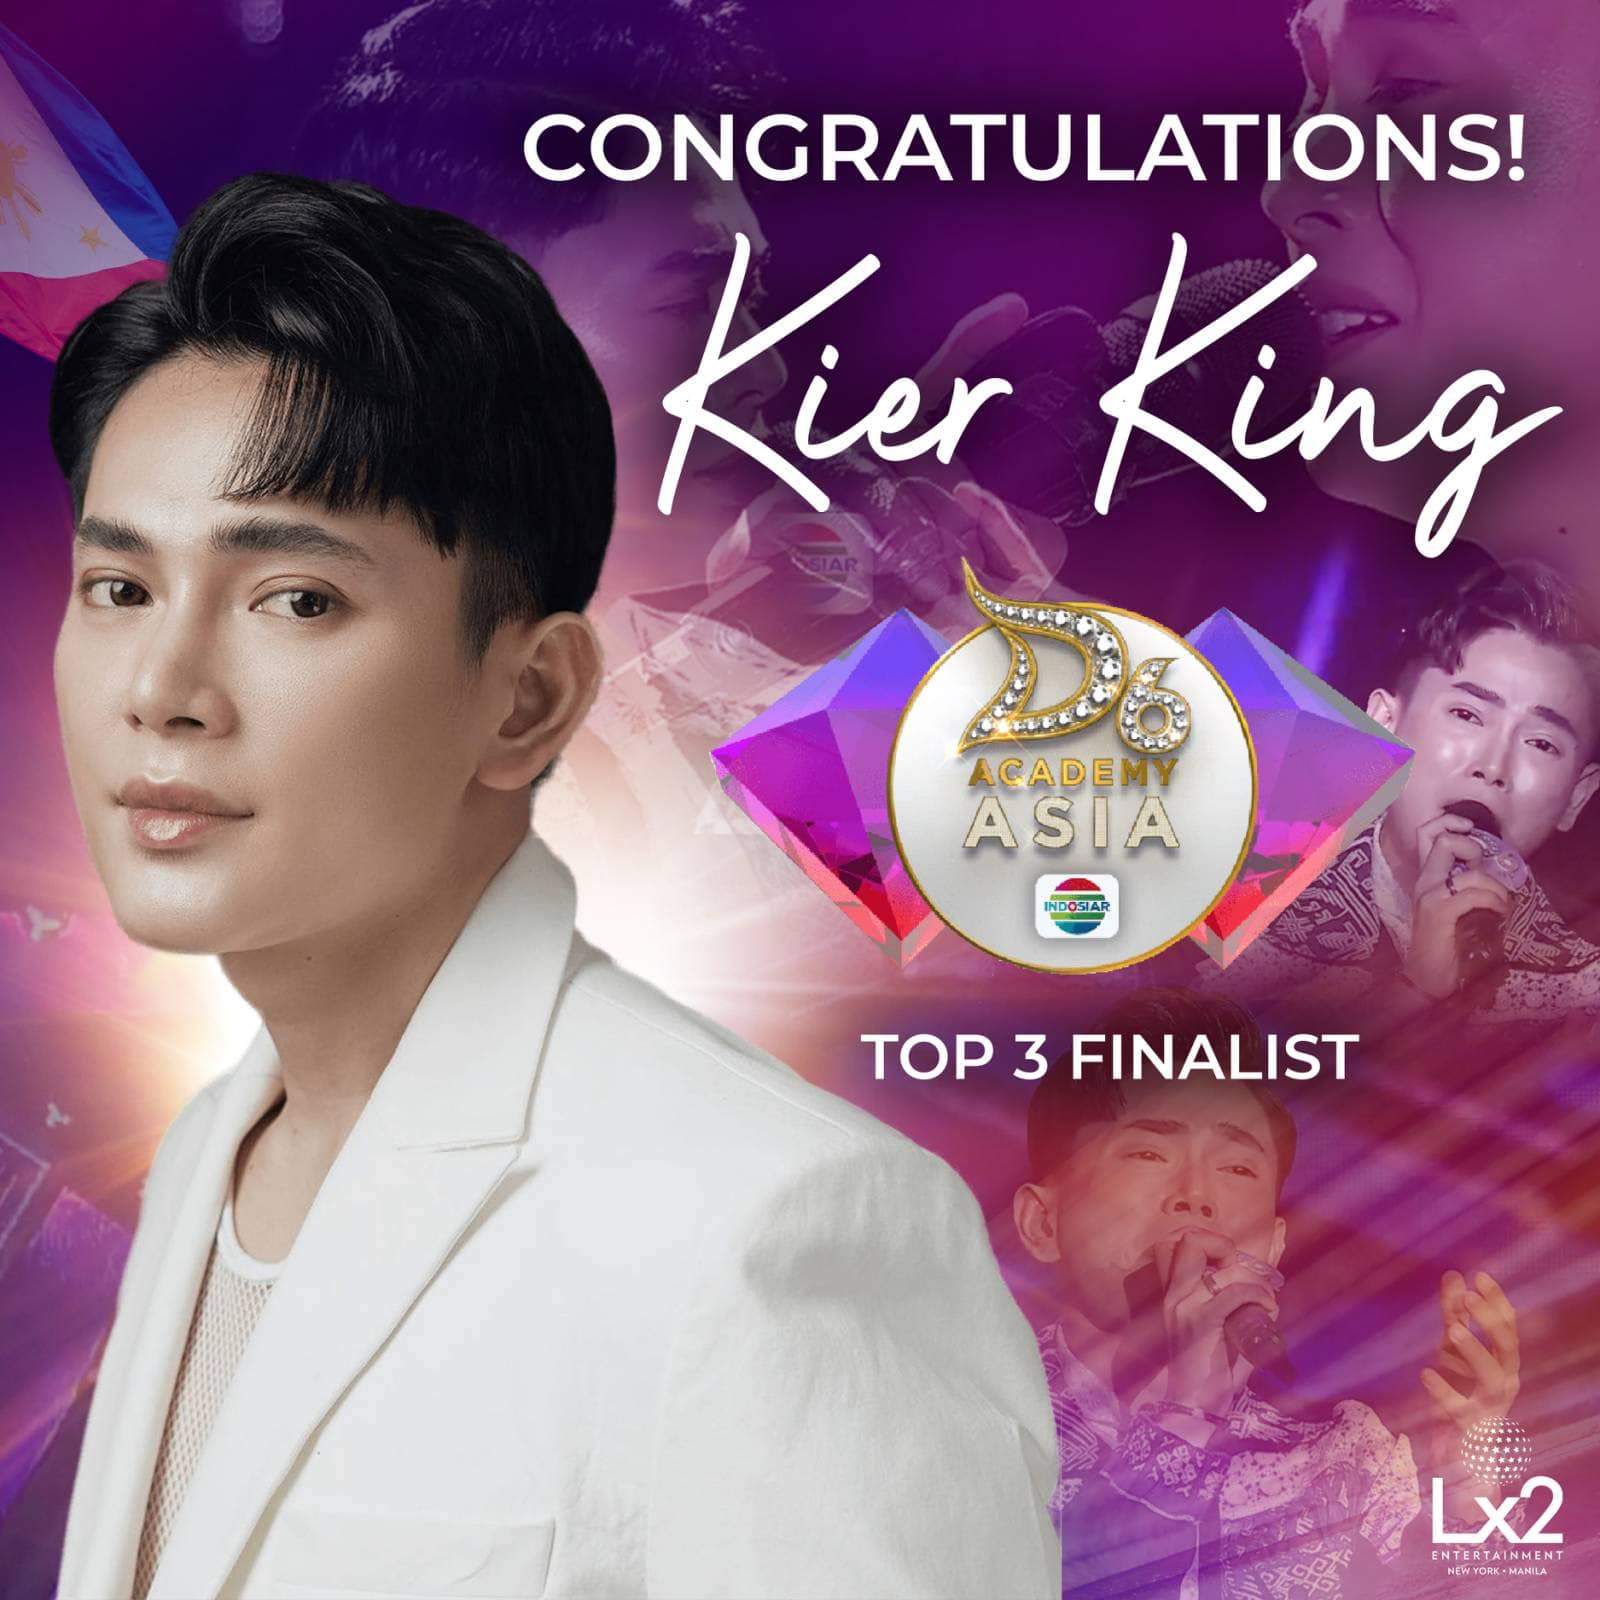 Philippines Kier King successfully entered Indonesia’s Dangdut Academy (D’Academy) Asia 6 Road To Grand Final Round